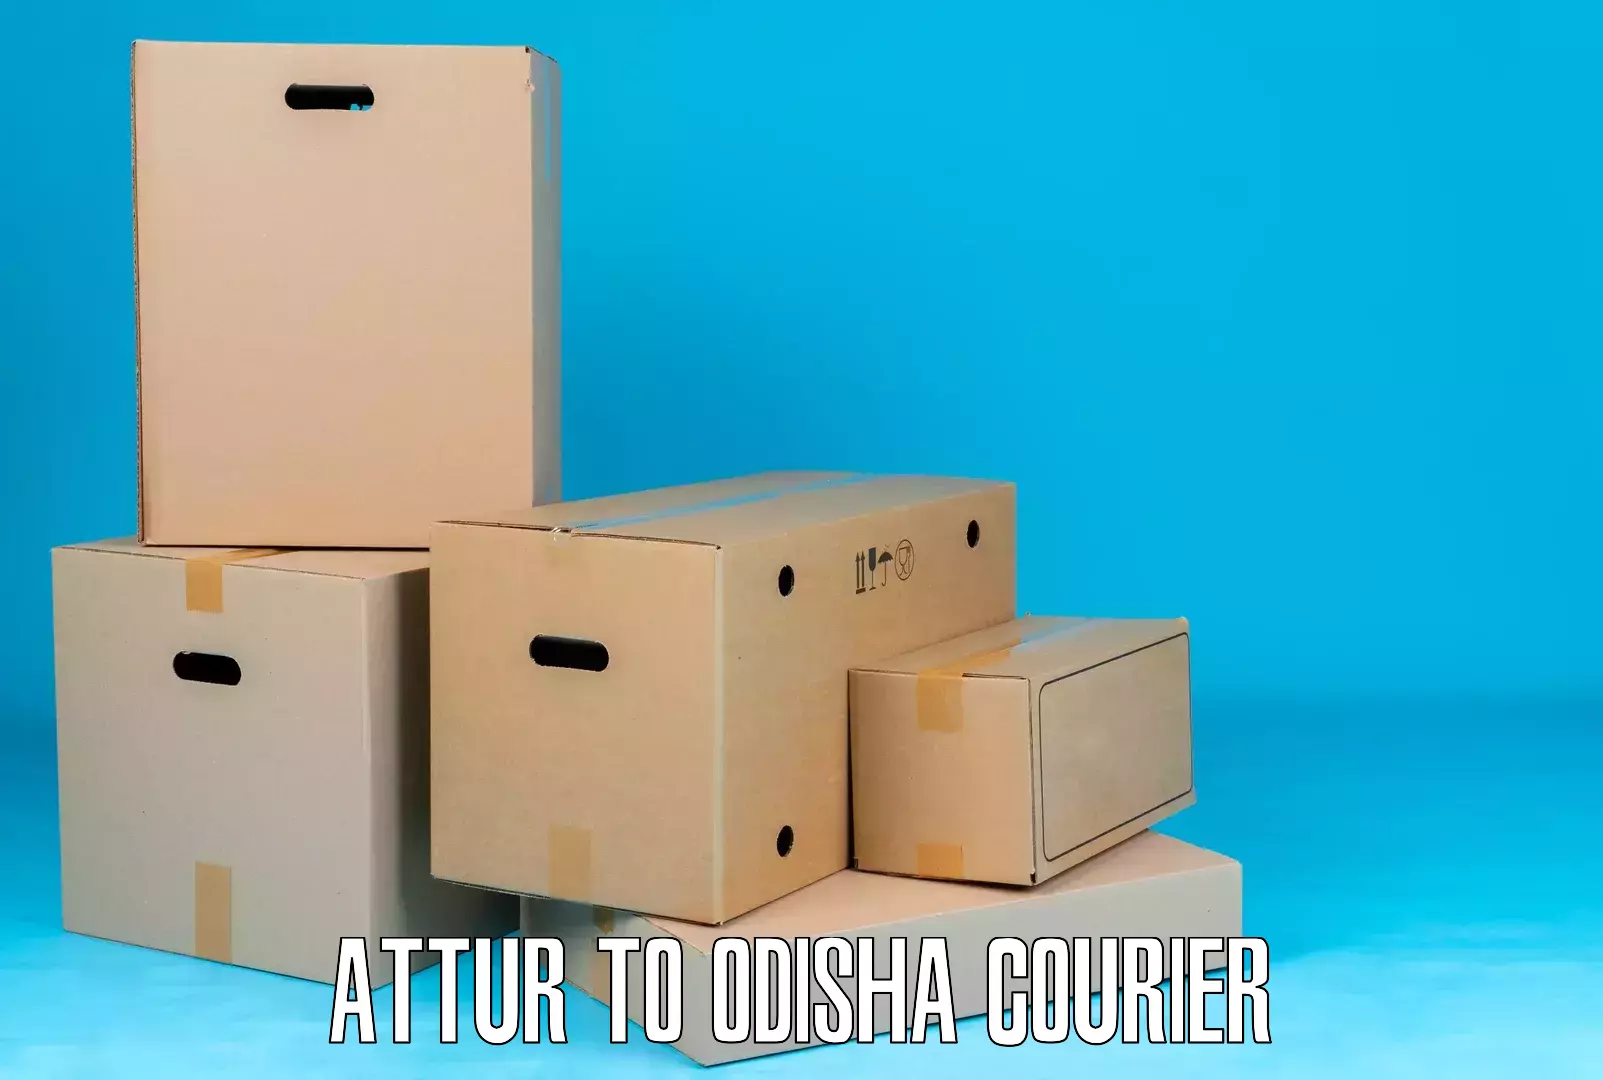 Affordable parcel rates Attur to Odisha